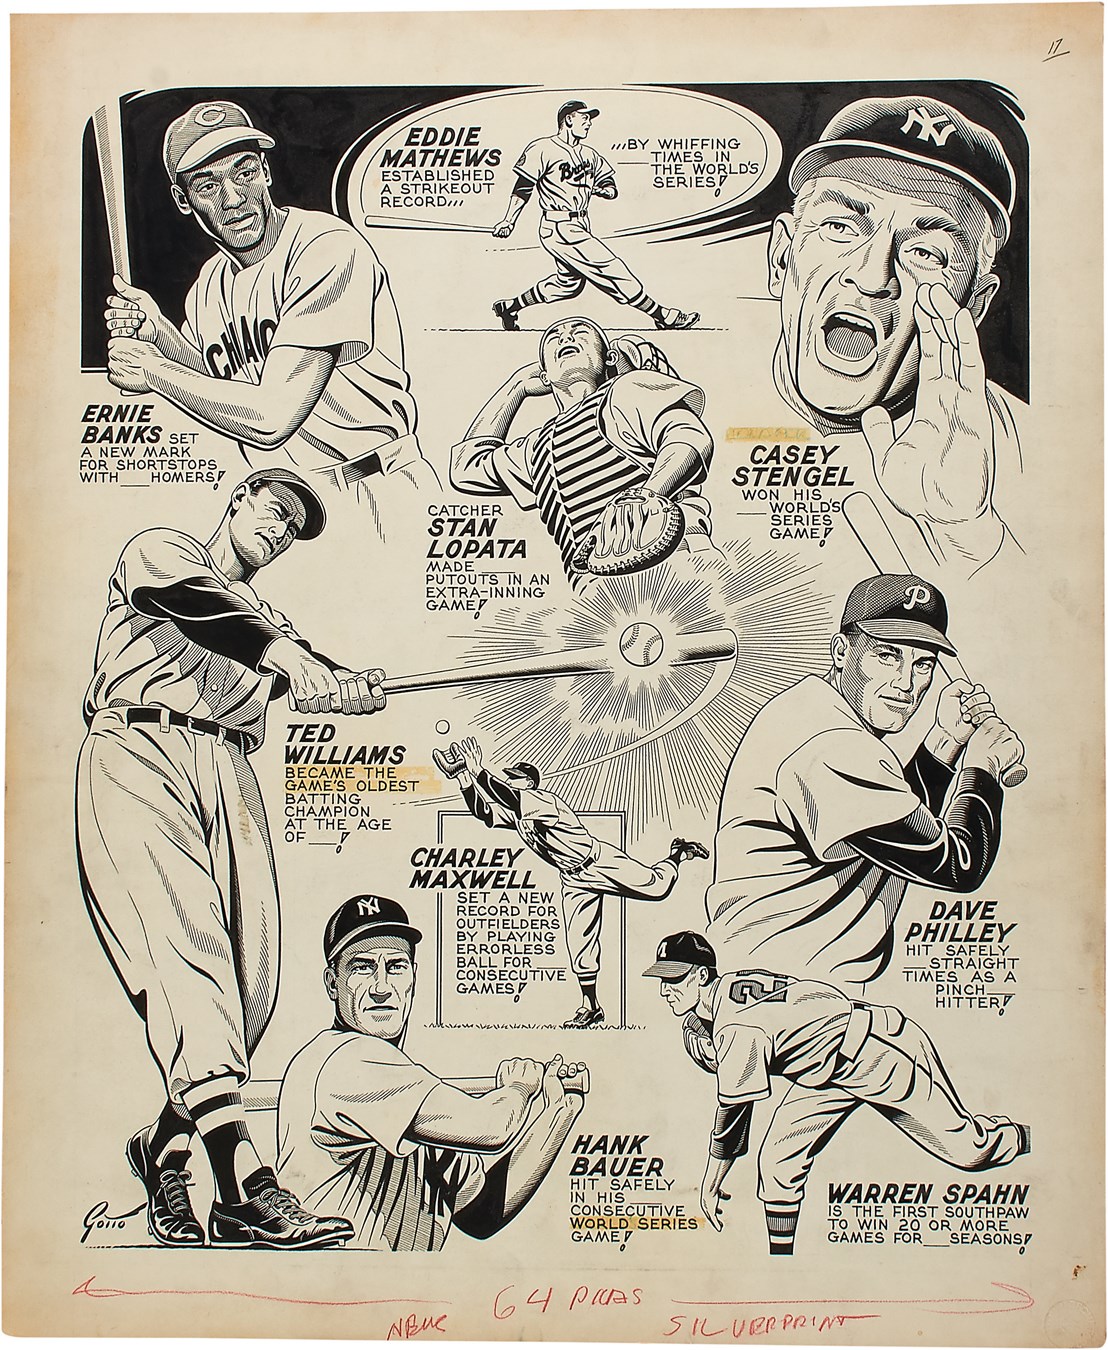 - 1958 Ted Williams, Ernie Banks, Casey Stengel, Warren Spahn "Records" by Ray Gotto - Published in The Sporting News